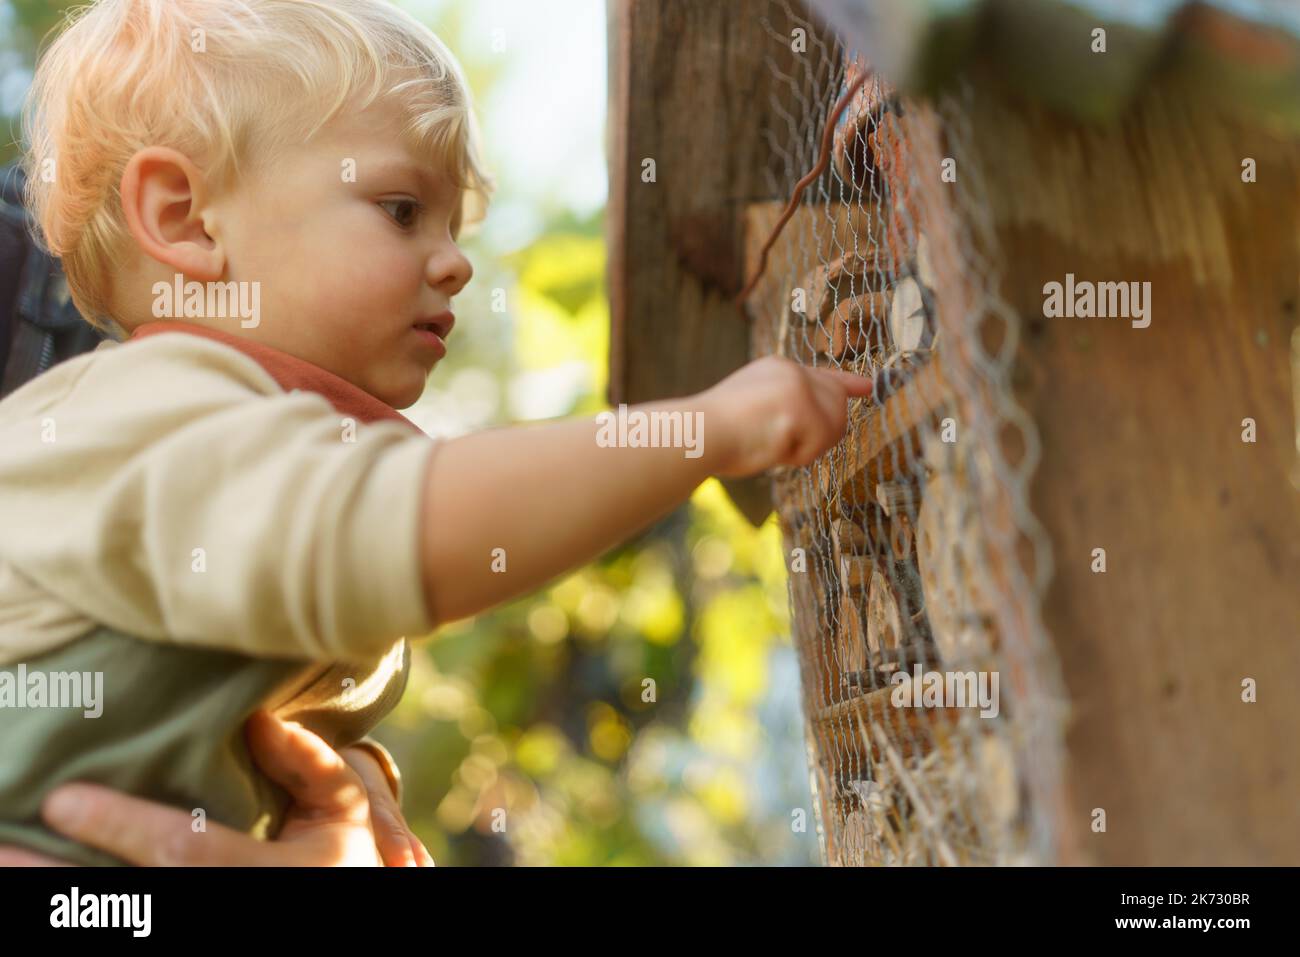 Little boy looking at insect hotel. Concept of home education, ecology gardening and sustainable lifestyle. Stock Photo